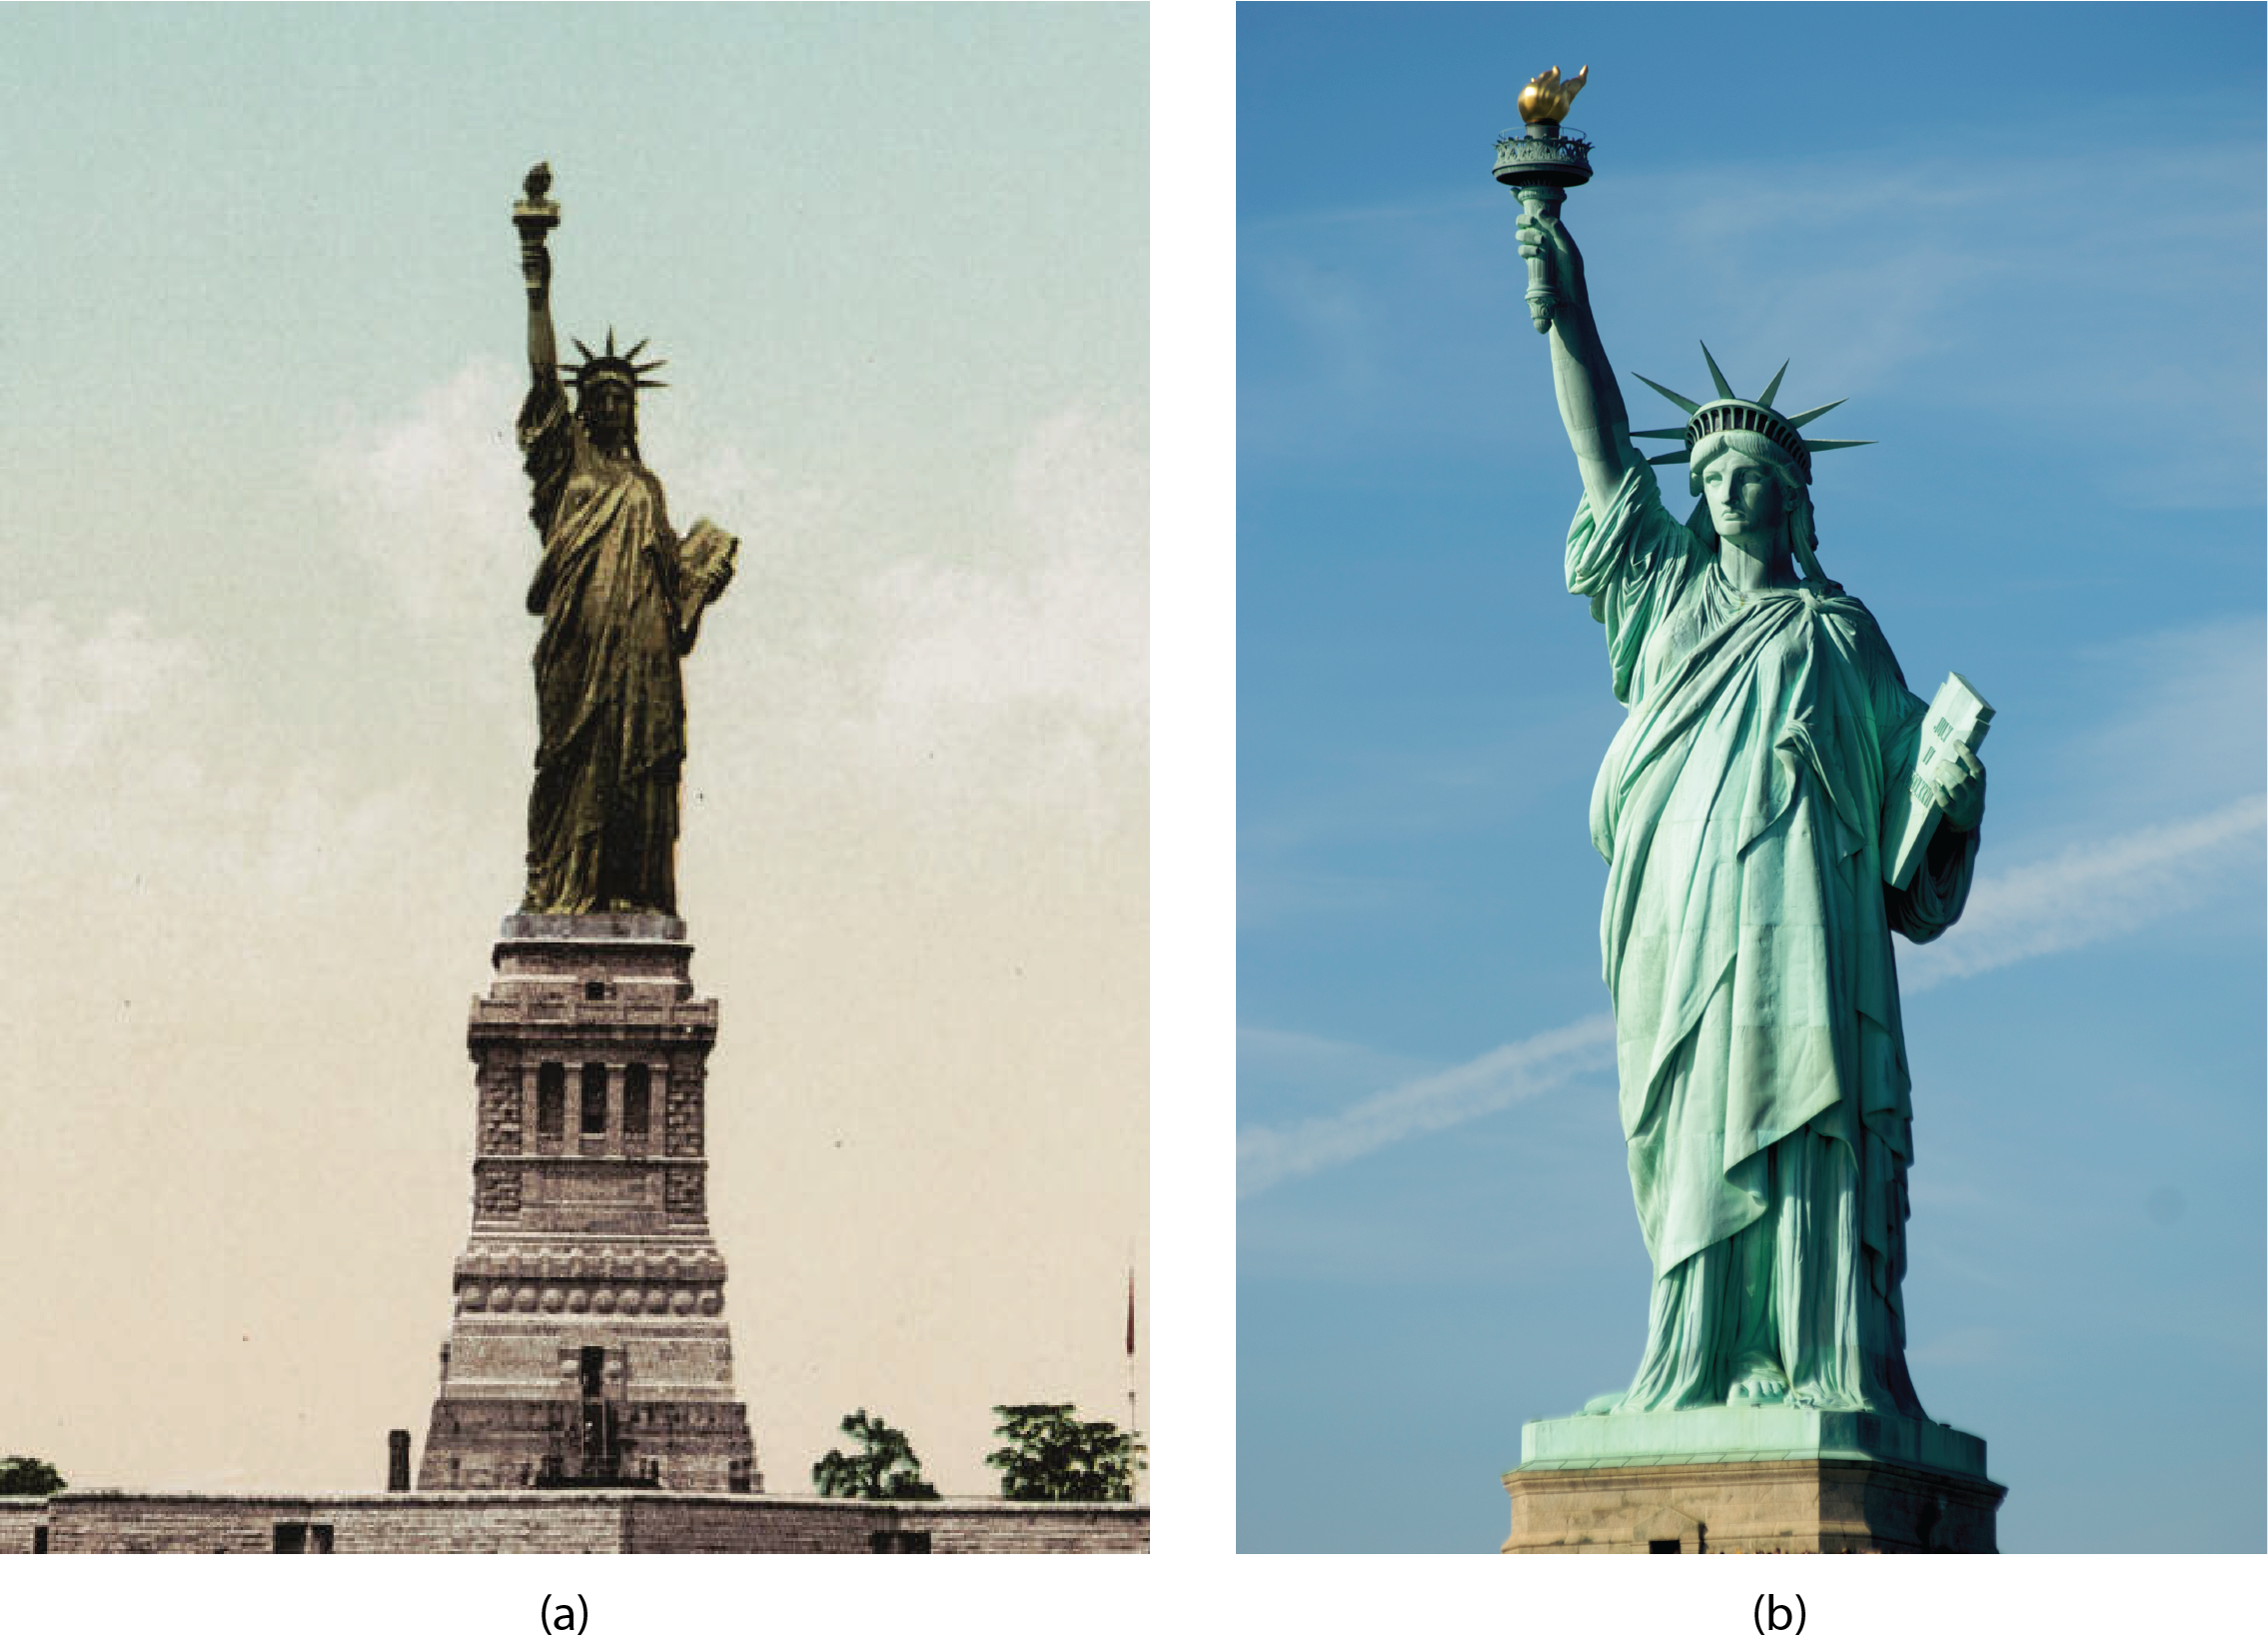 Two photos of the Statue of Liberty are shown. The left photo depicts the original brown color of the copper. The right photo depicts the blue-green appearance of the statue today.